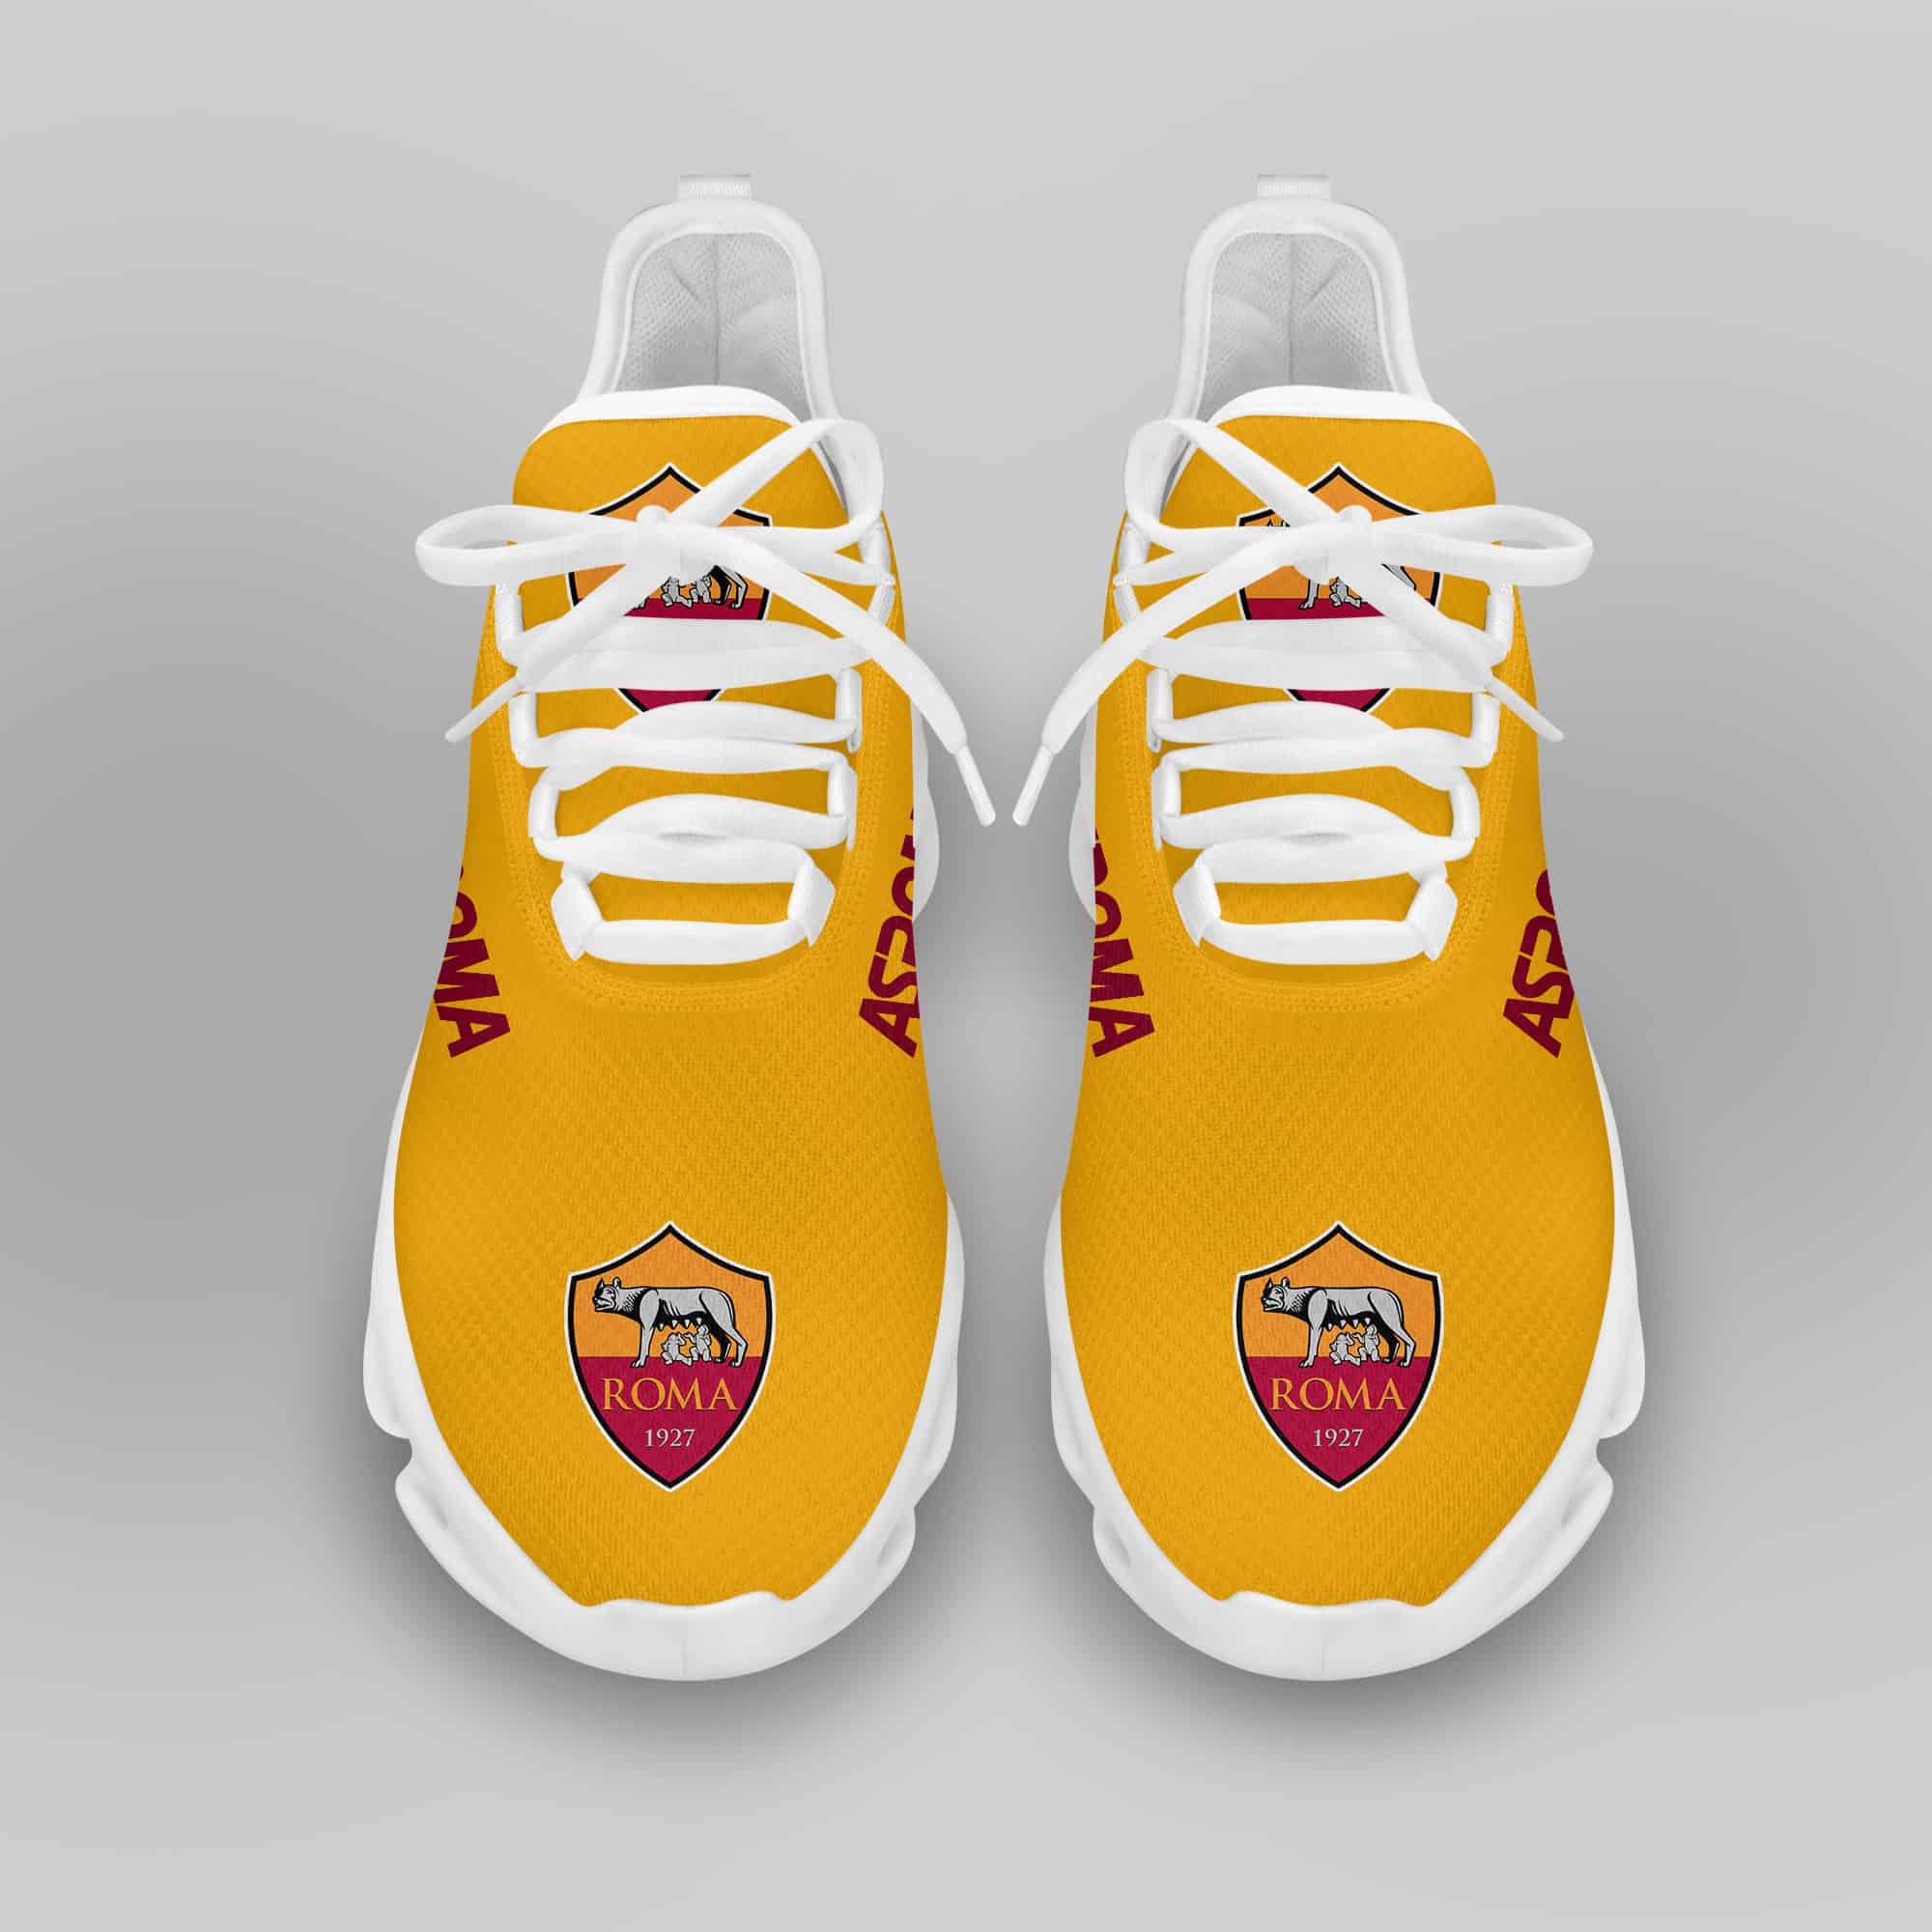 As Roma Running Shoes Max Soul Shoes Sneakers Ver 13 3